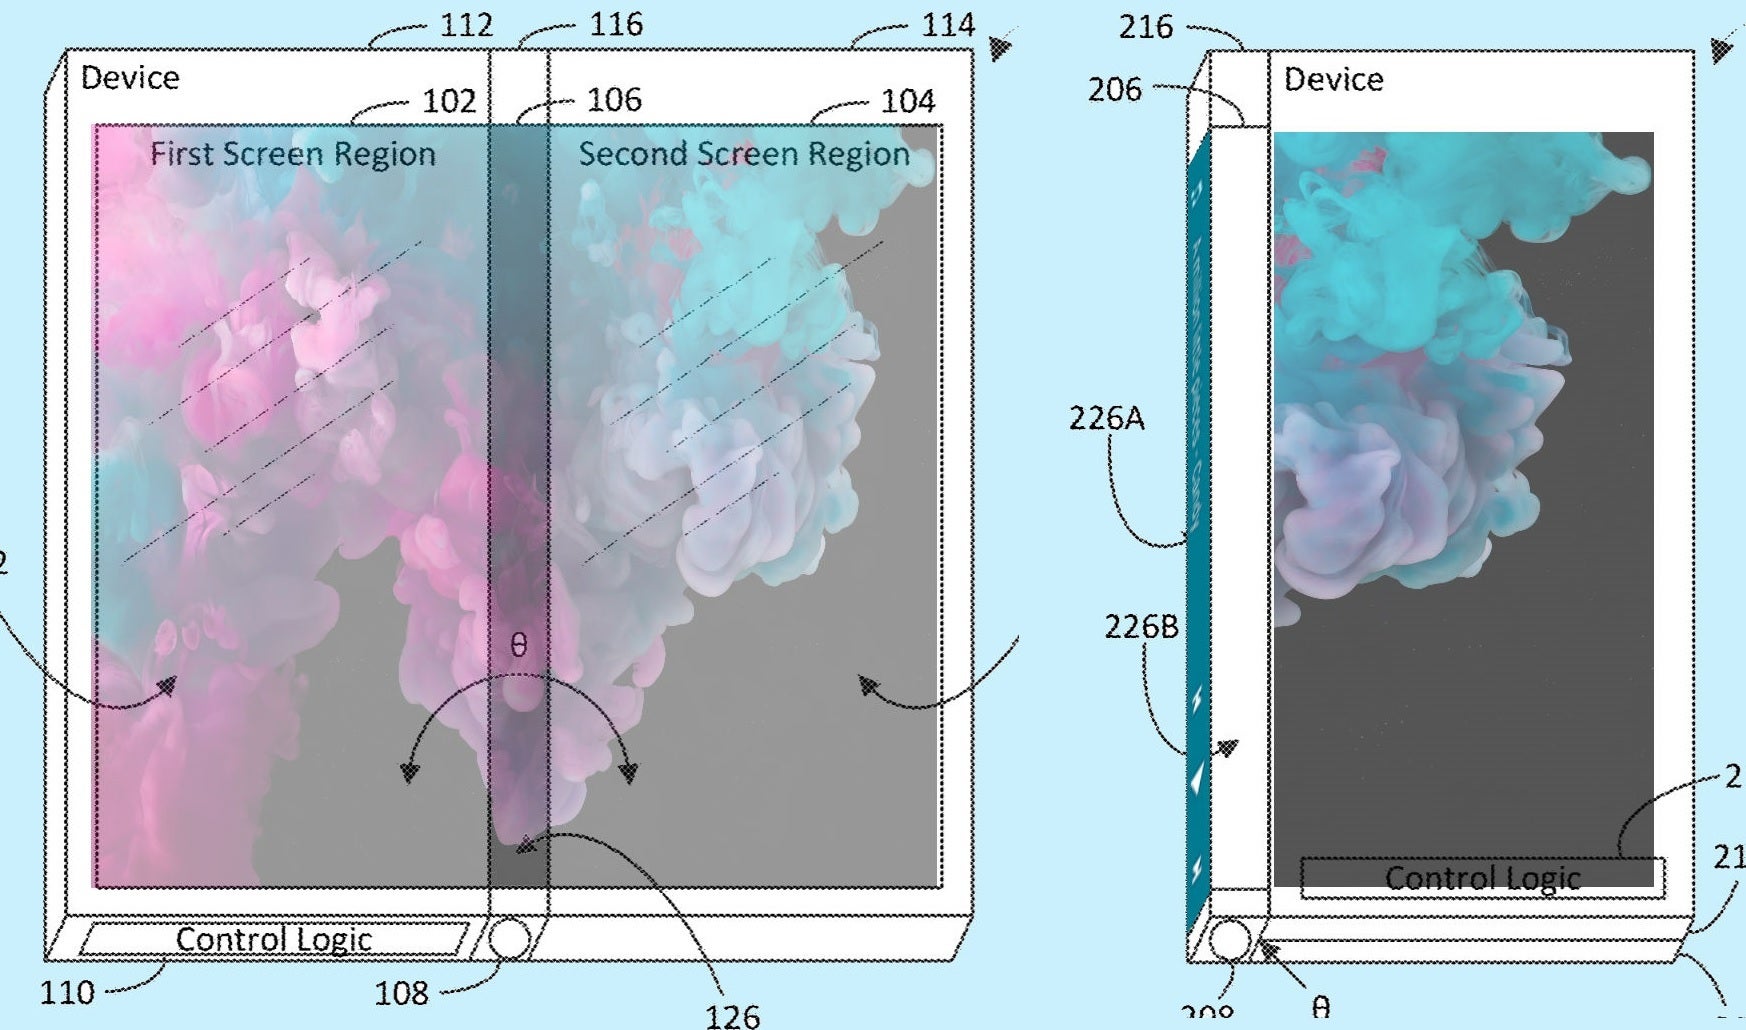 Via MSPoweruser - Microsoft patent shows dual screen device with a screen on its hinge